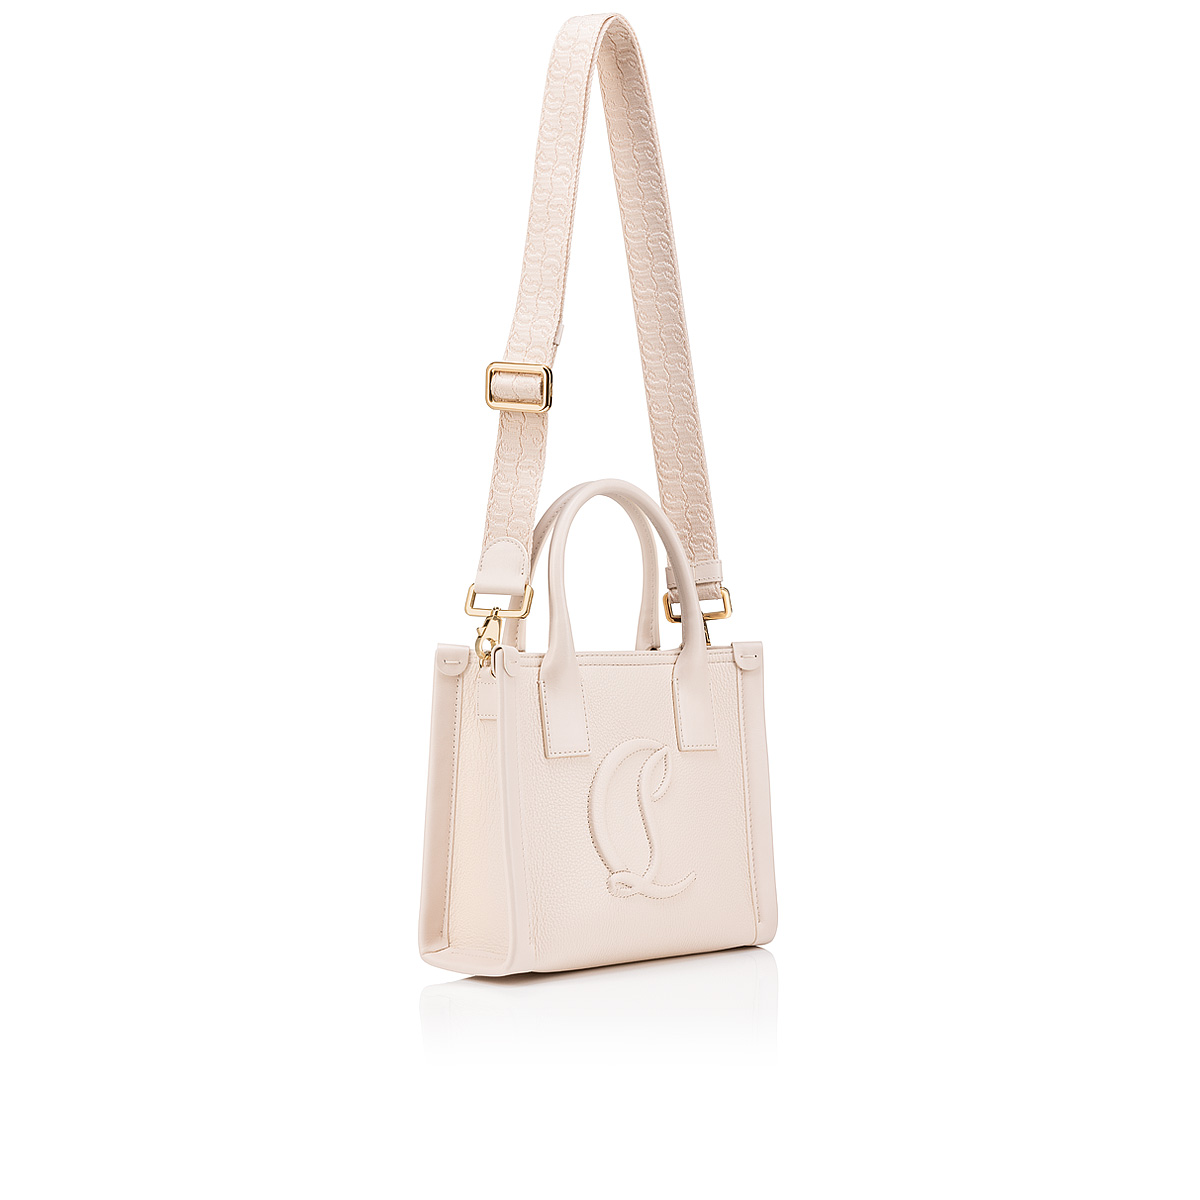 Christian Louboutin By My Side Small Canvas Tote Bag - Bergdorf